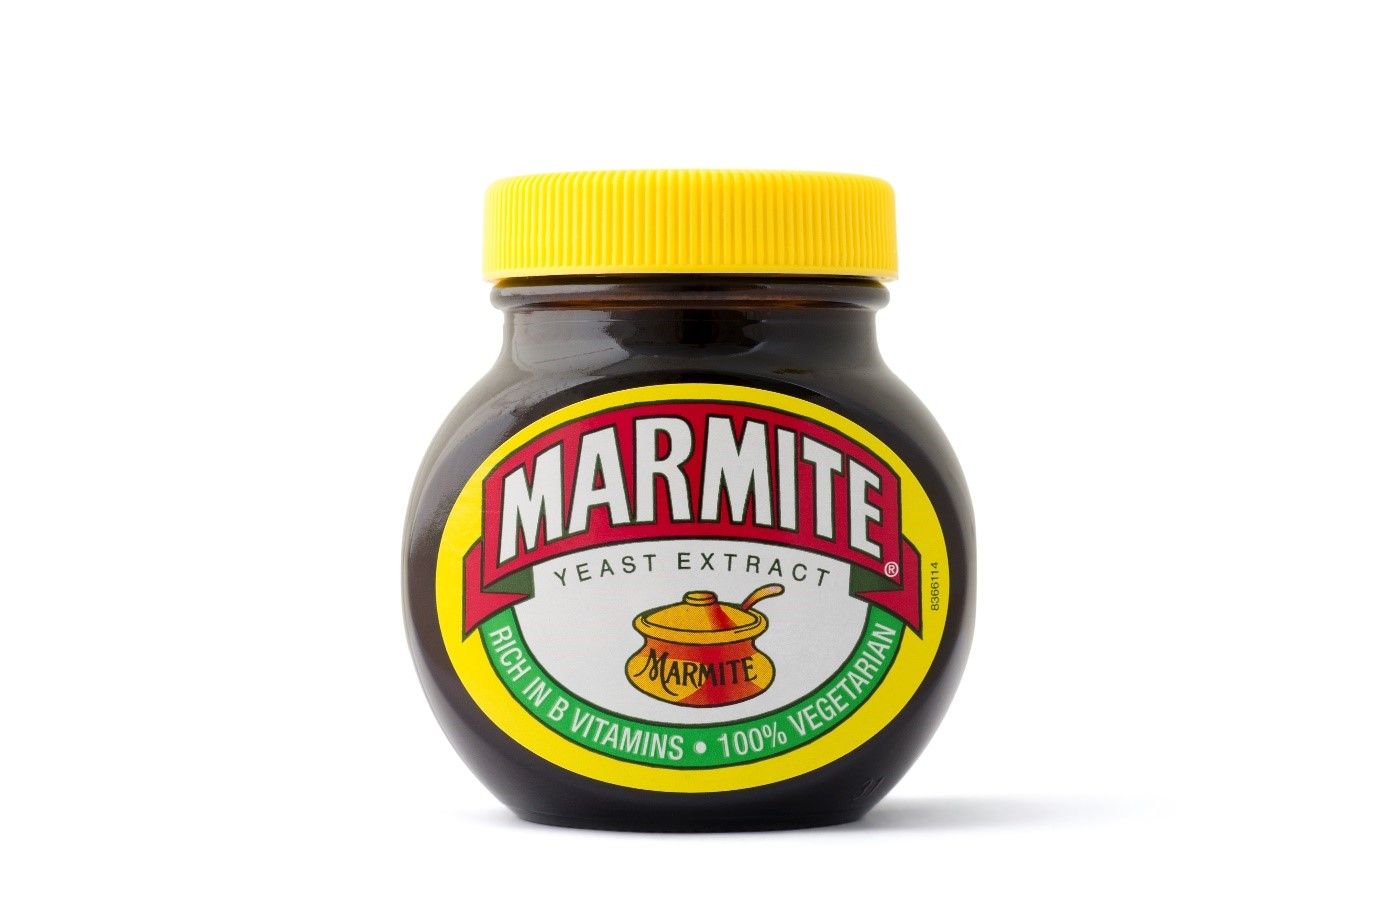 Going Long on Marmite?